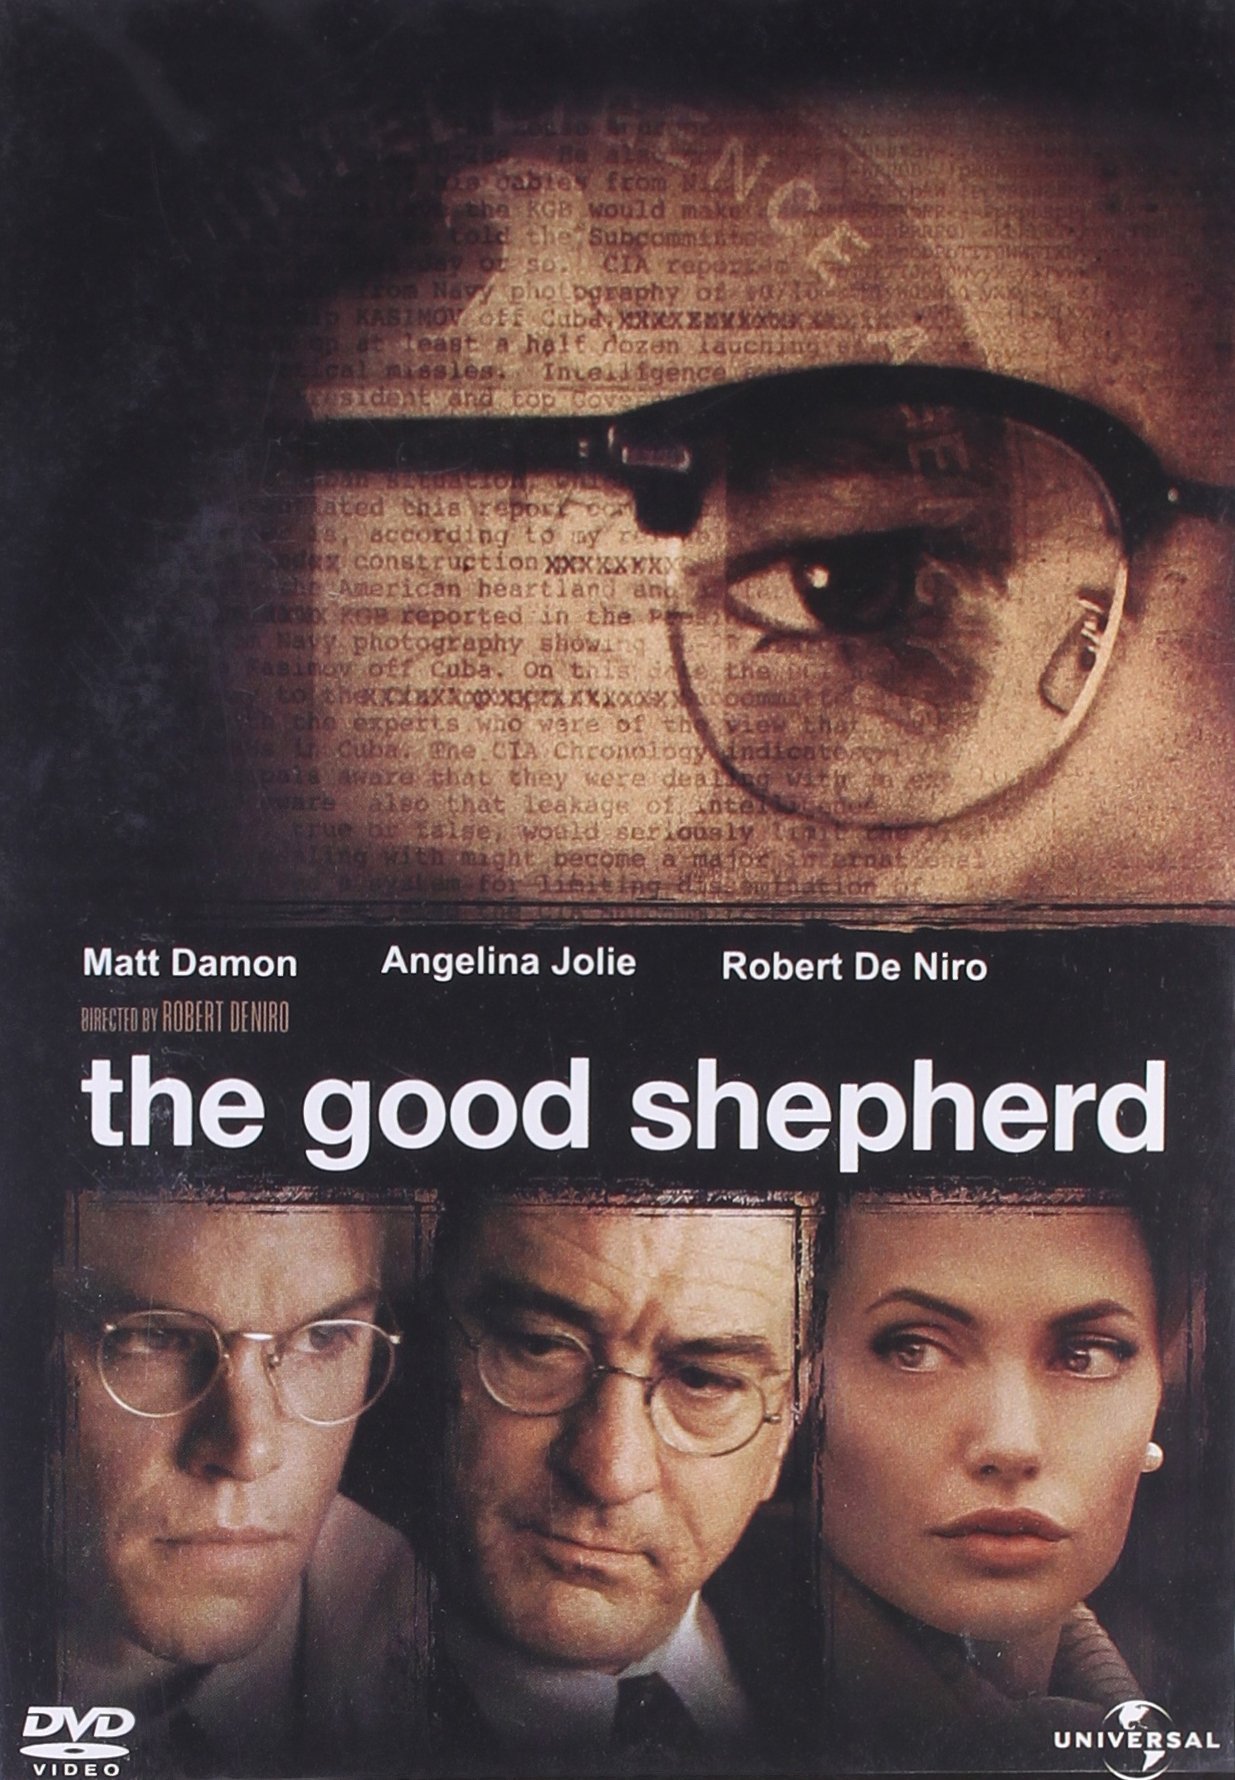 the-good-shepherd-movie-purchase-or-watch-online